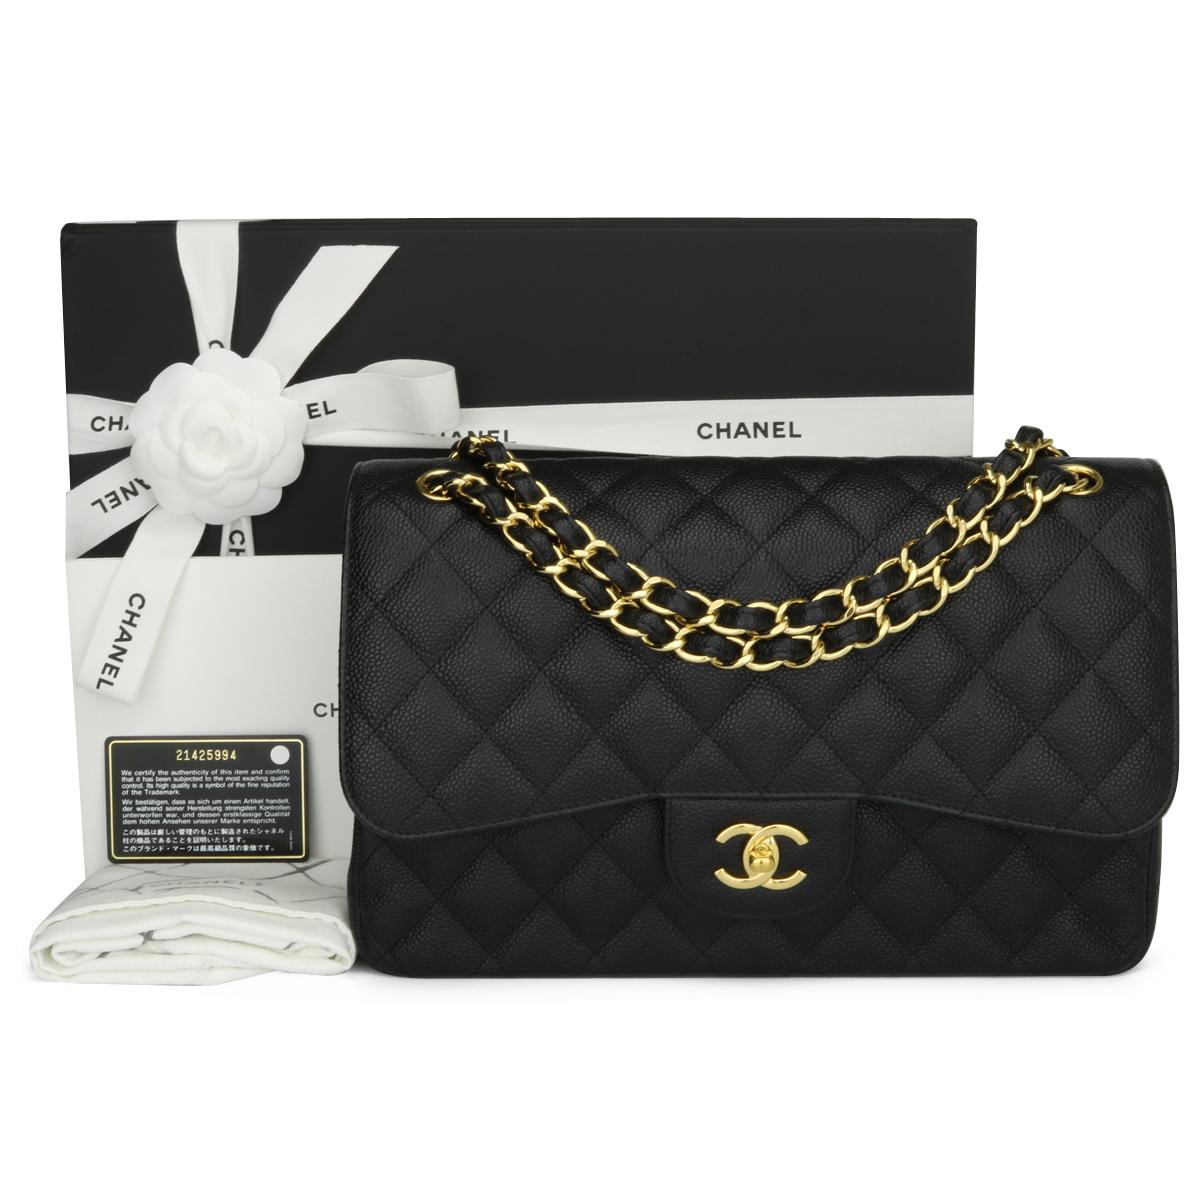 Authentic CHANEL Classic Jumbo Double Flap Bag Black Caviar with Gold Hardware 2016.

This stunning bag is in mint condition, the bag still holds its original shape, and the hardware is still very shiny. The leather smells fresh as if new.

Exterior